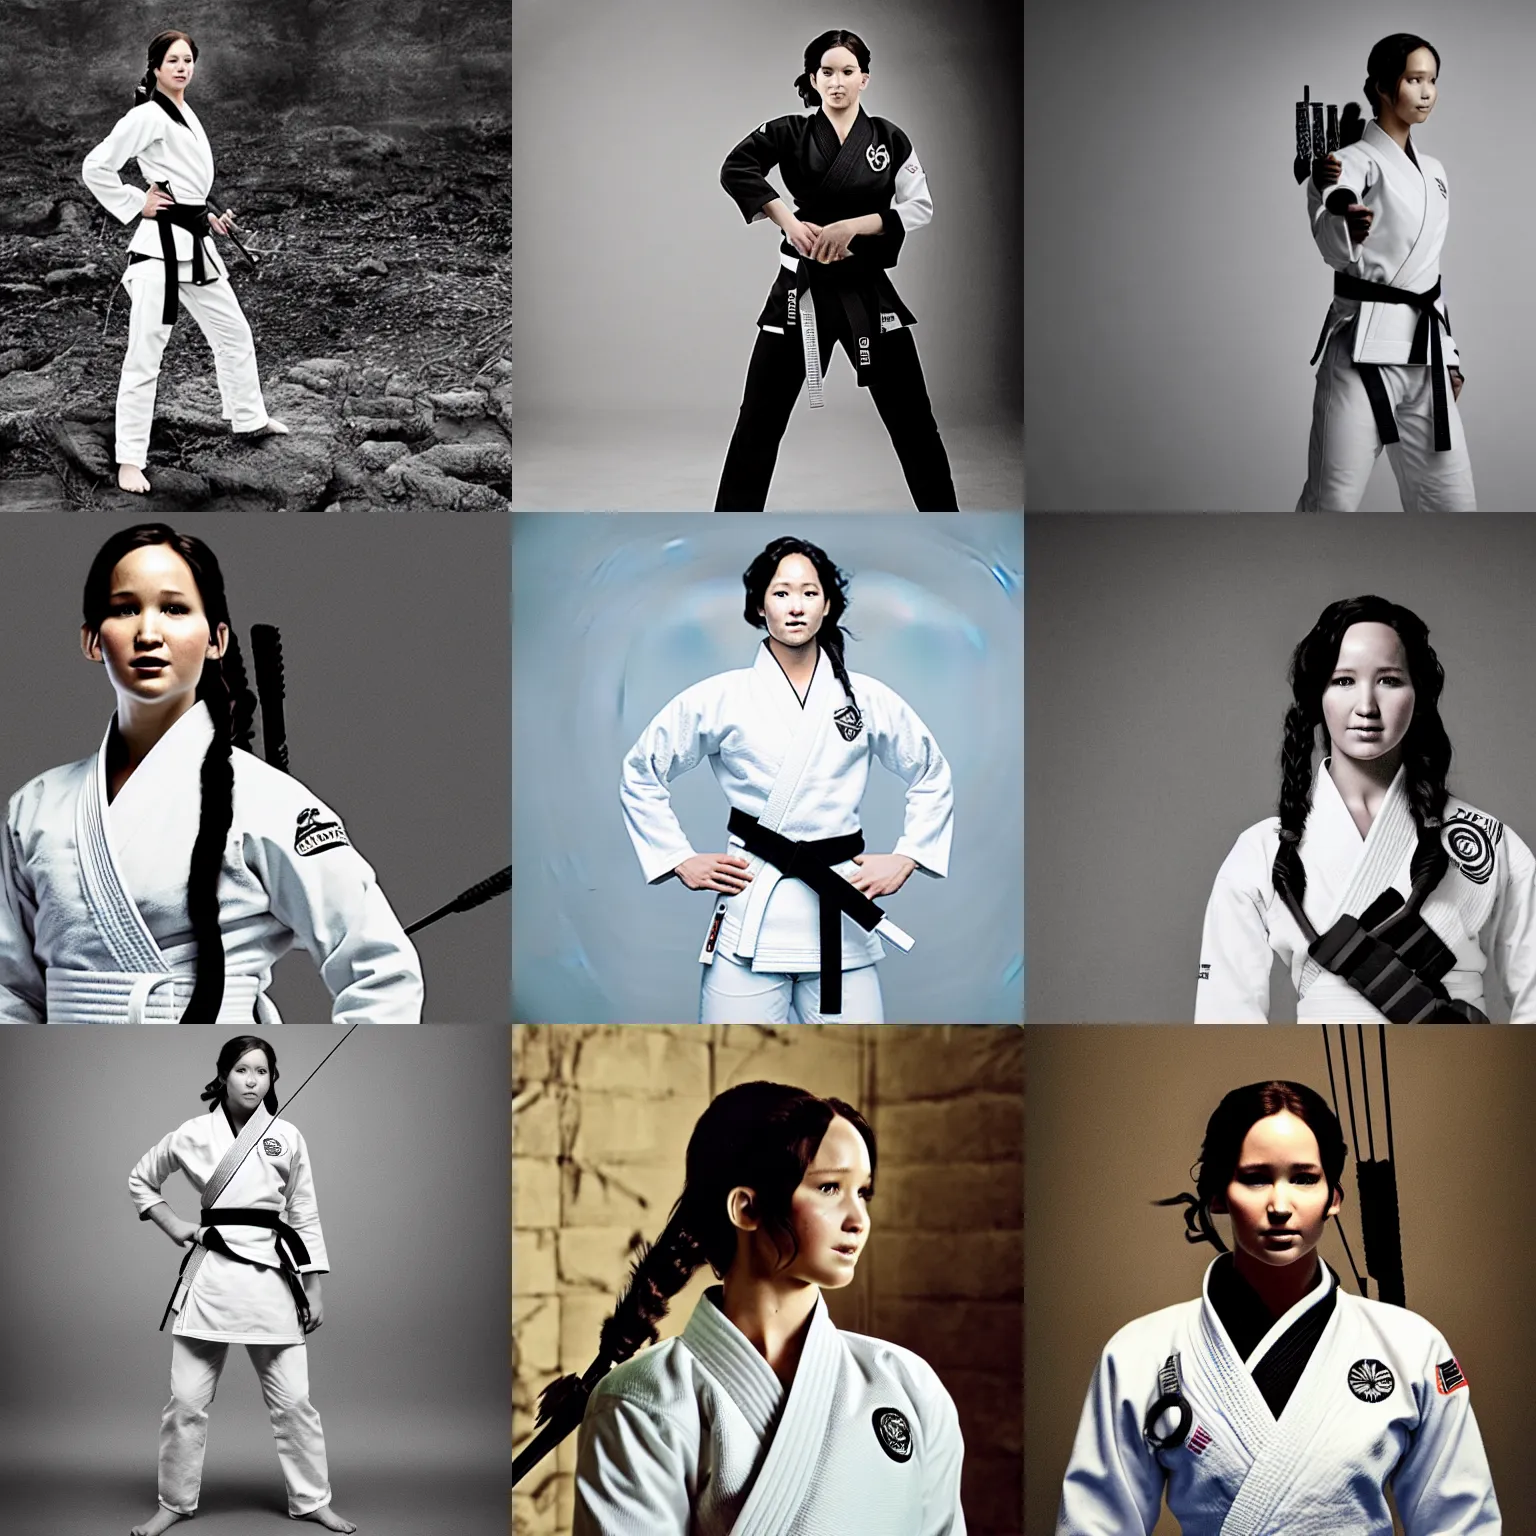 Prompt: Katniss Everdeen as judo black belt wearing a white gi, standing in a dojo, candid portrait photography by Annie Leibovitz